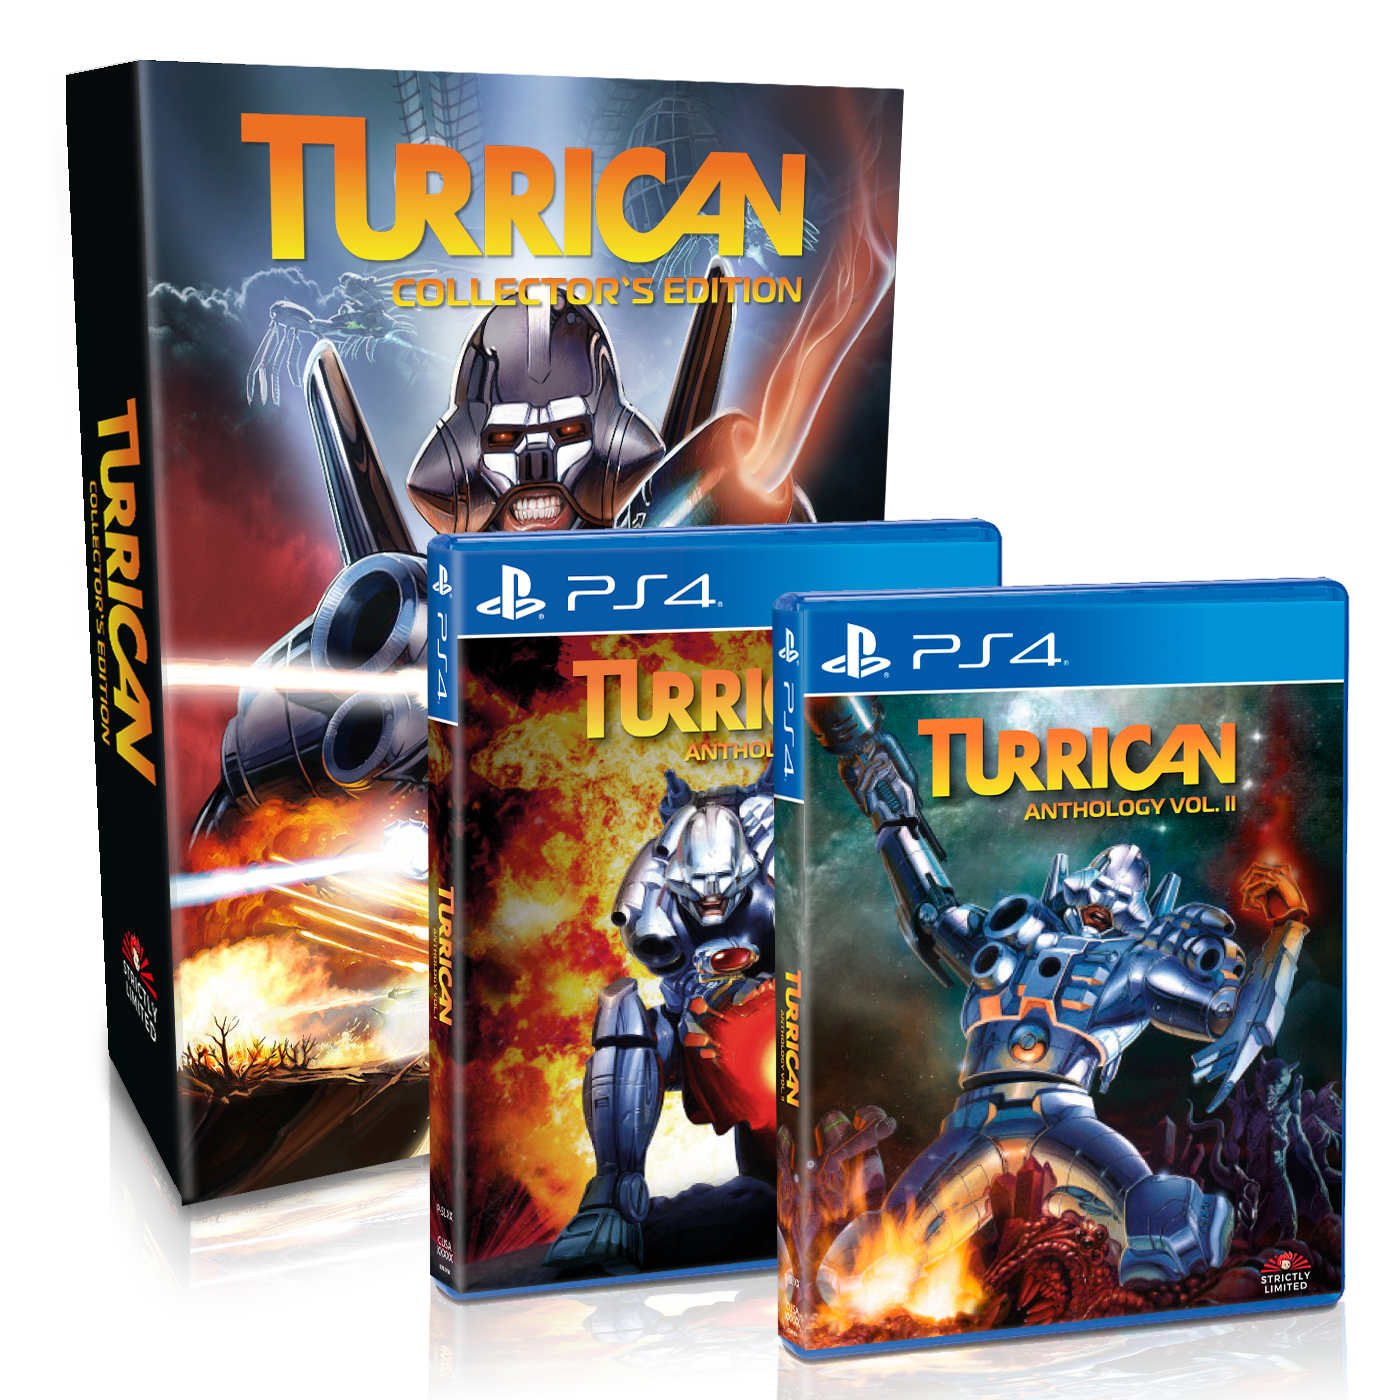 Turrican – Strictly Limited Games